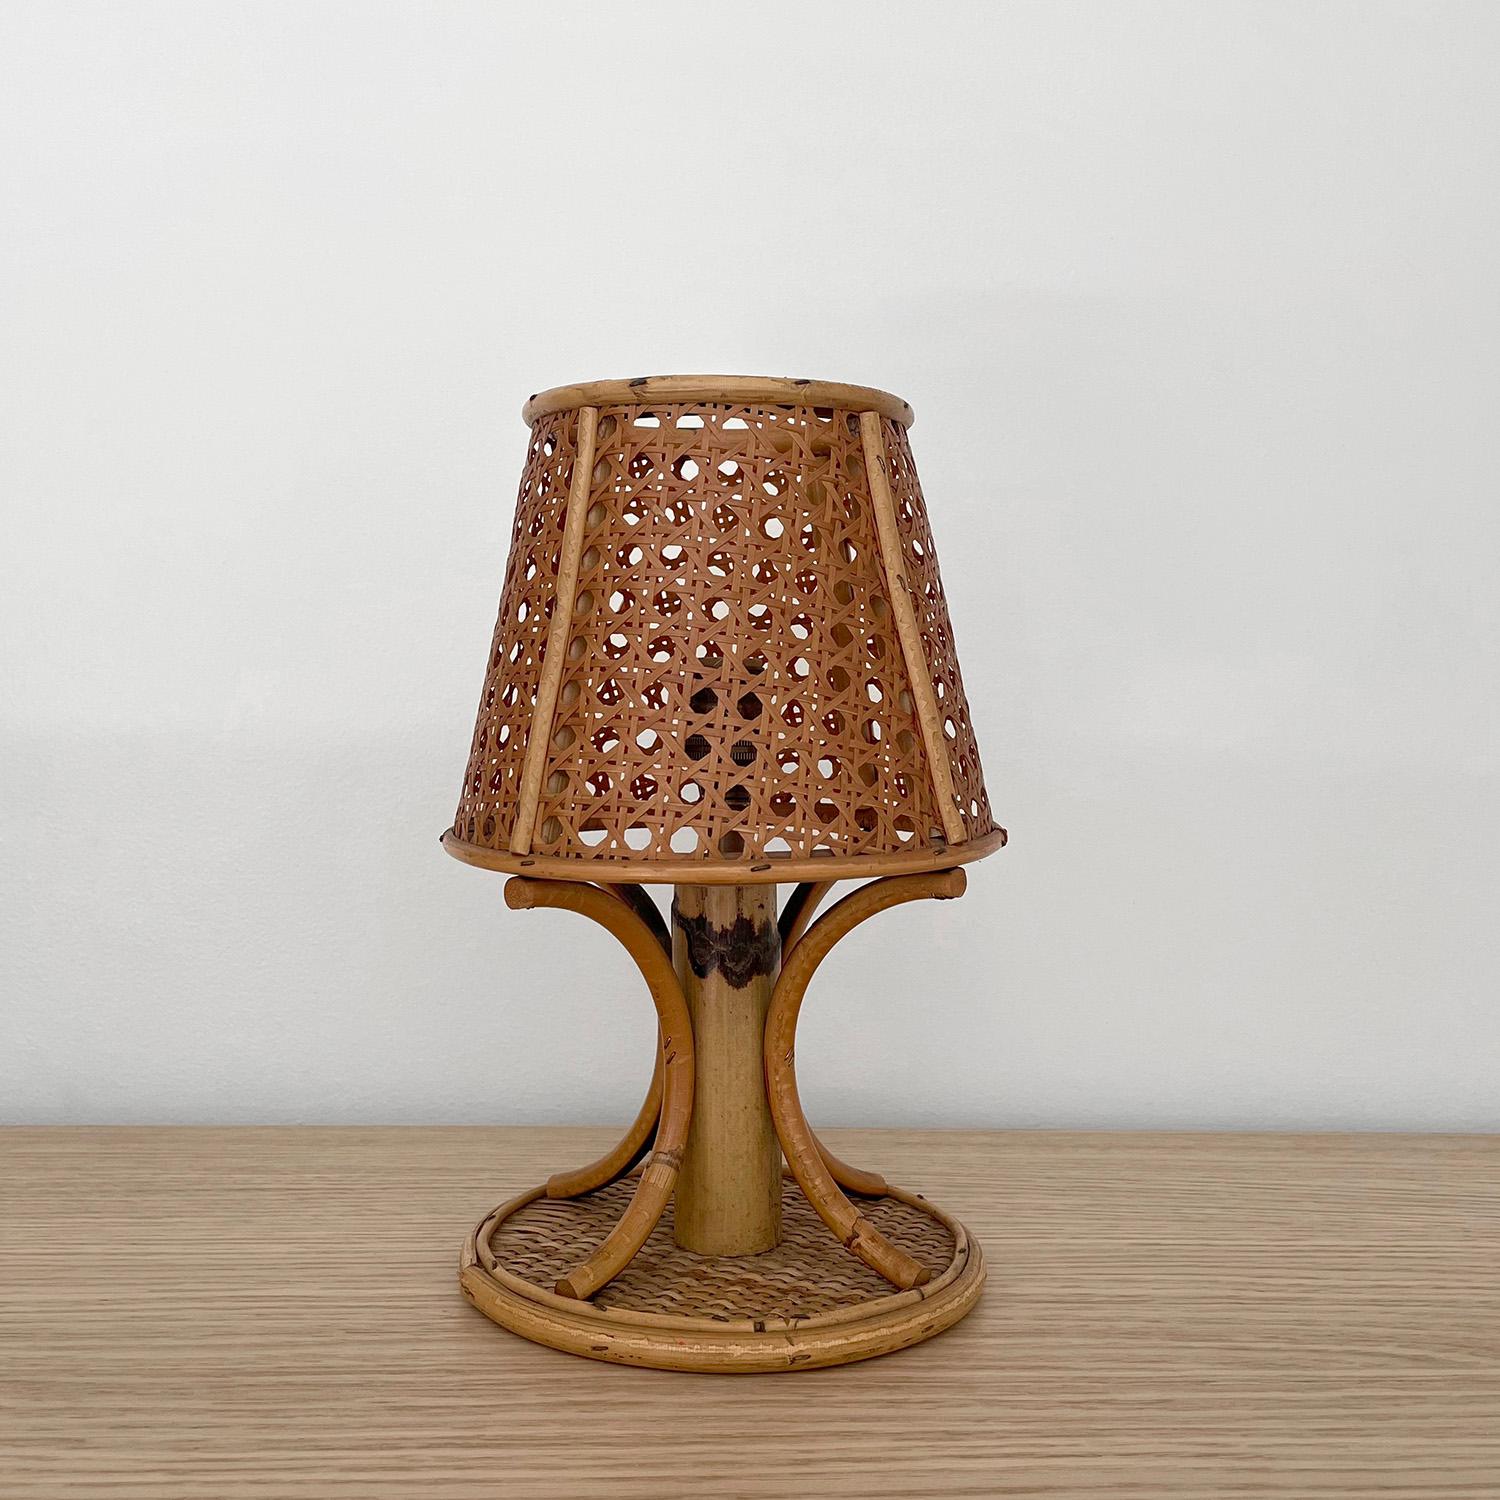 Petite French cane lamp
France, mid century 
Comprised of all natural materials
Cane wrapped shade illuminates light beautifully 
Circular rattan base
Natural color variations 
Patina from age and use
Newly rewired
Single socket candelabra base 


